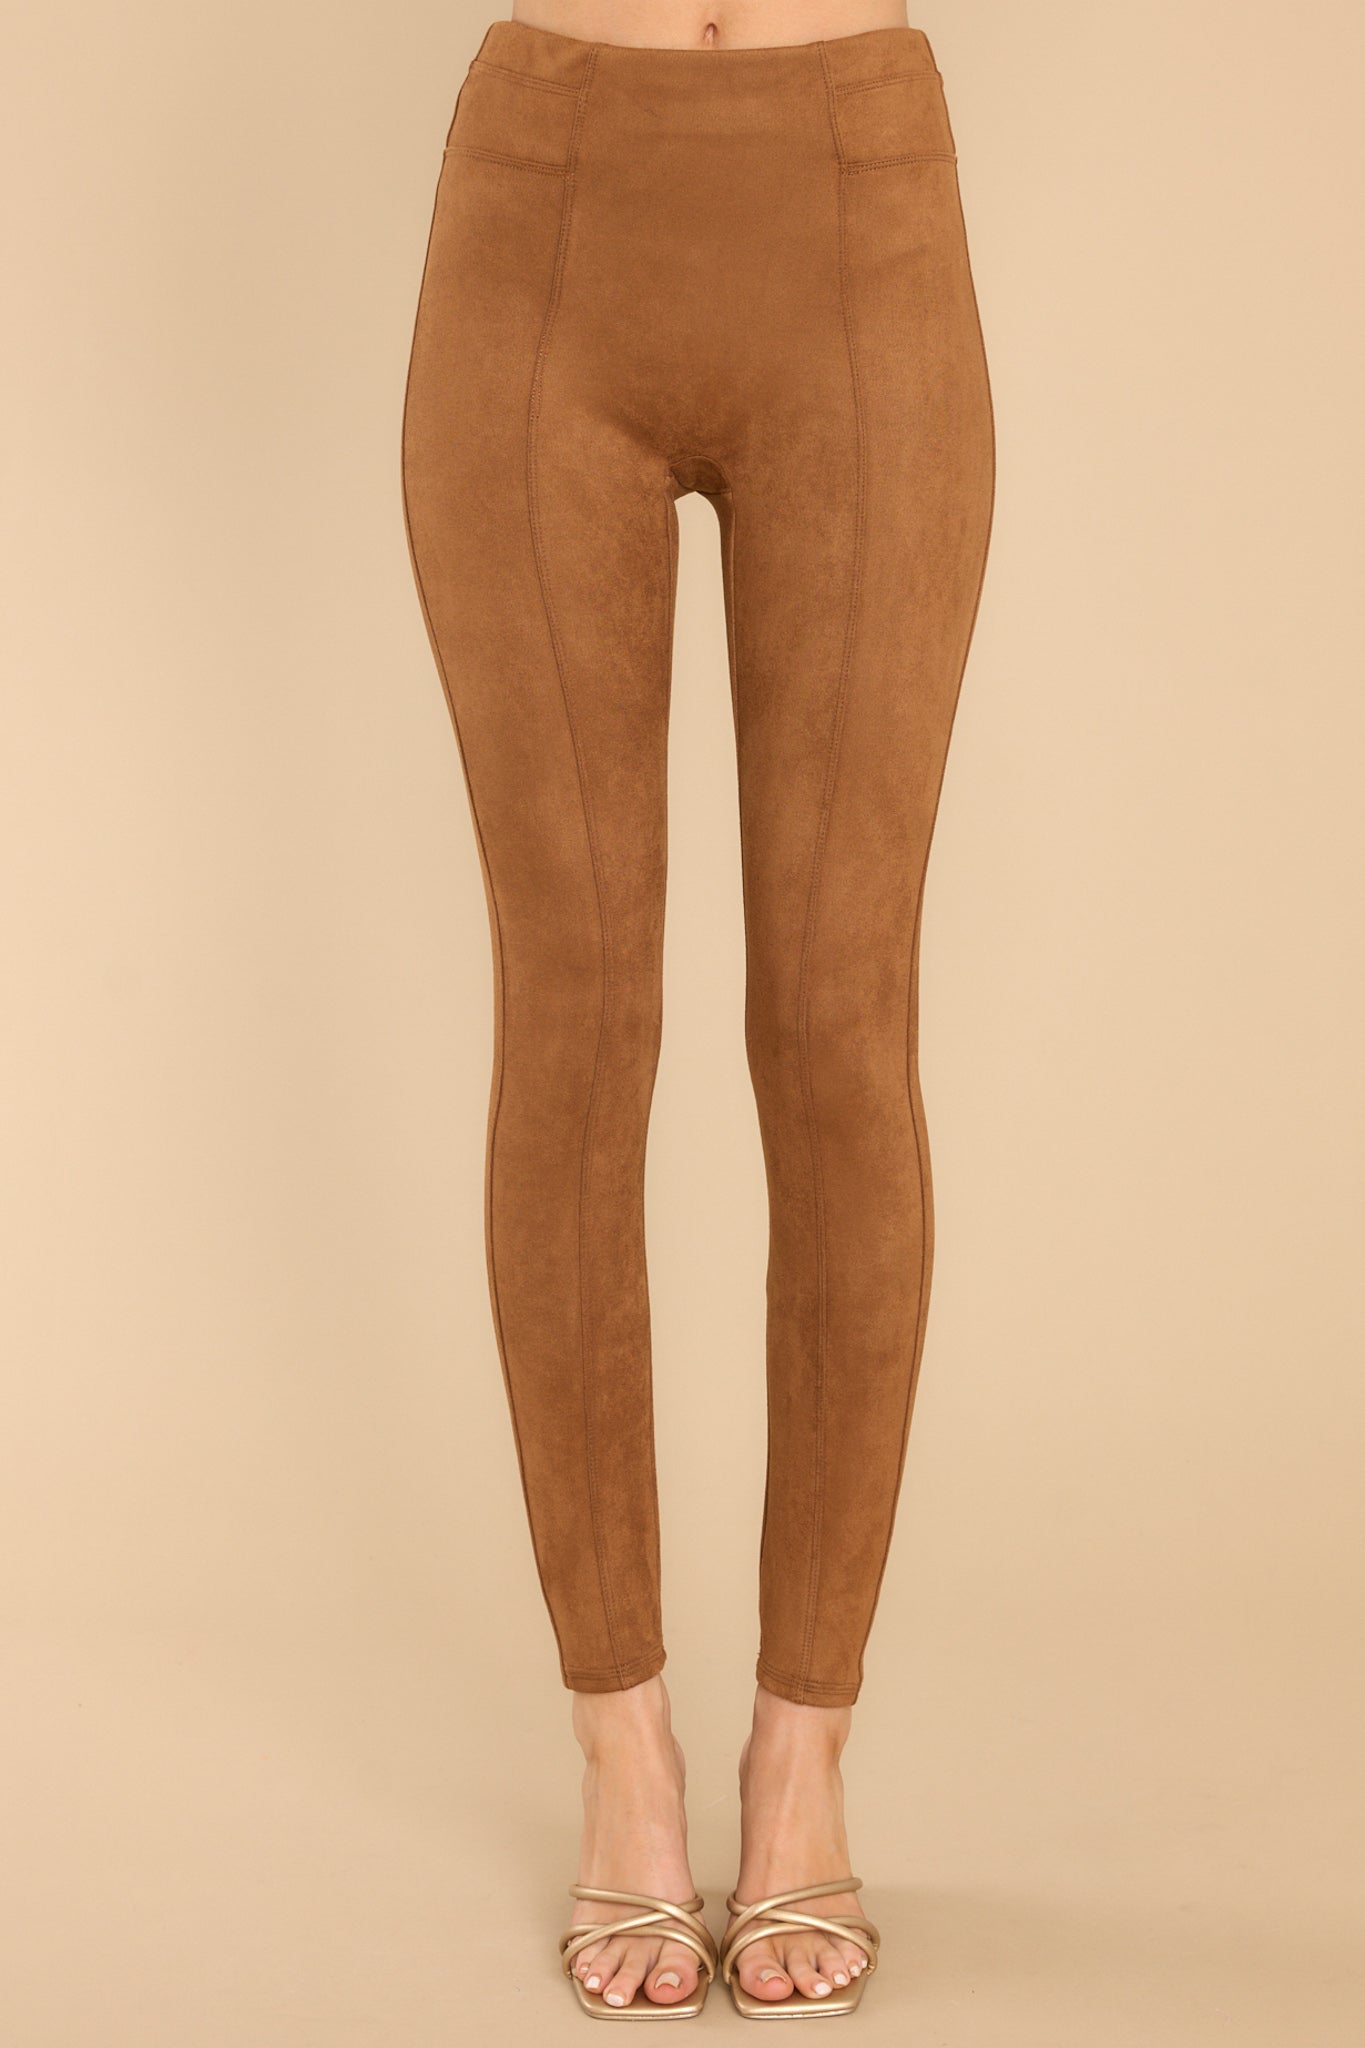 NWT SPANX 20322R Faux Suede Leggings in Rich Caramel Seamed Pull